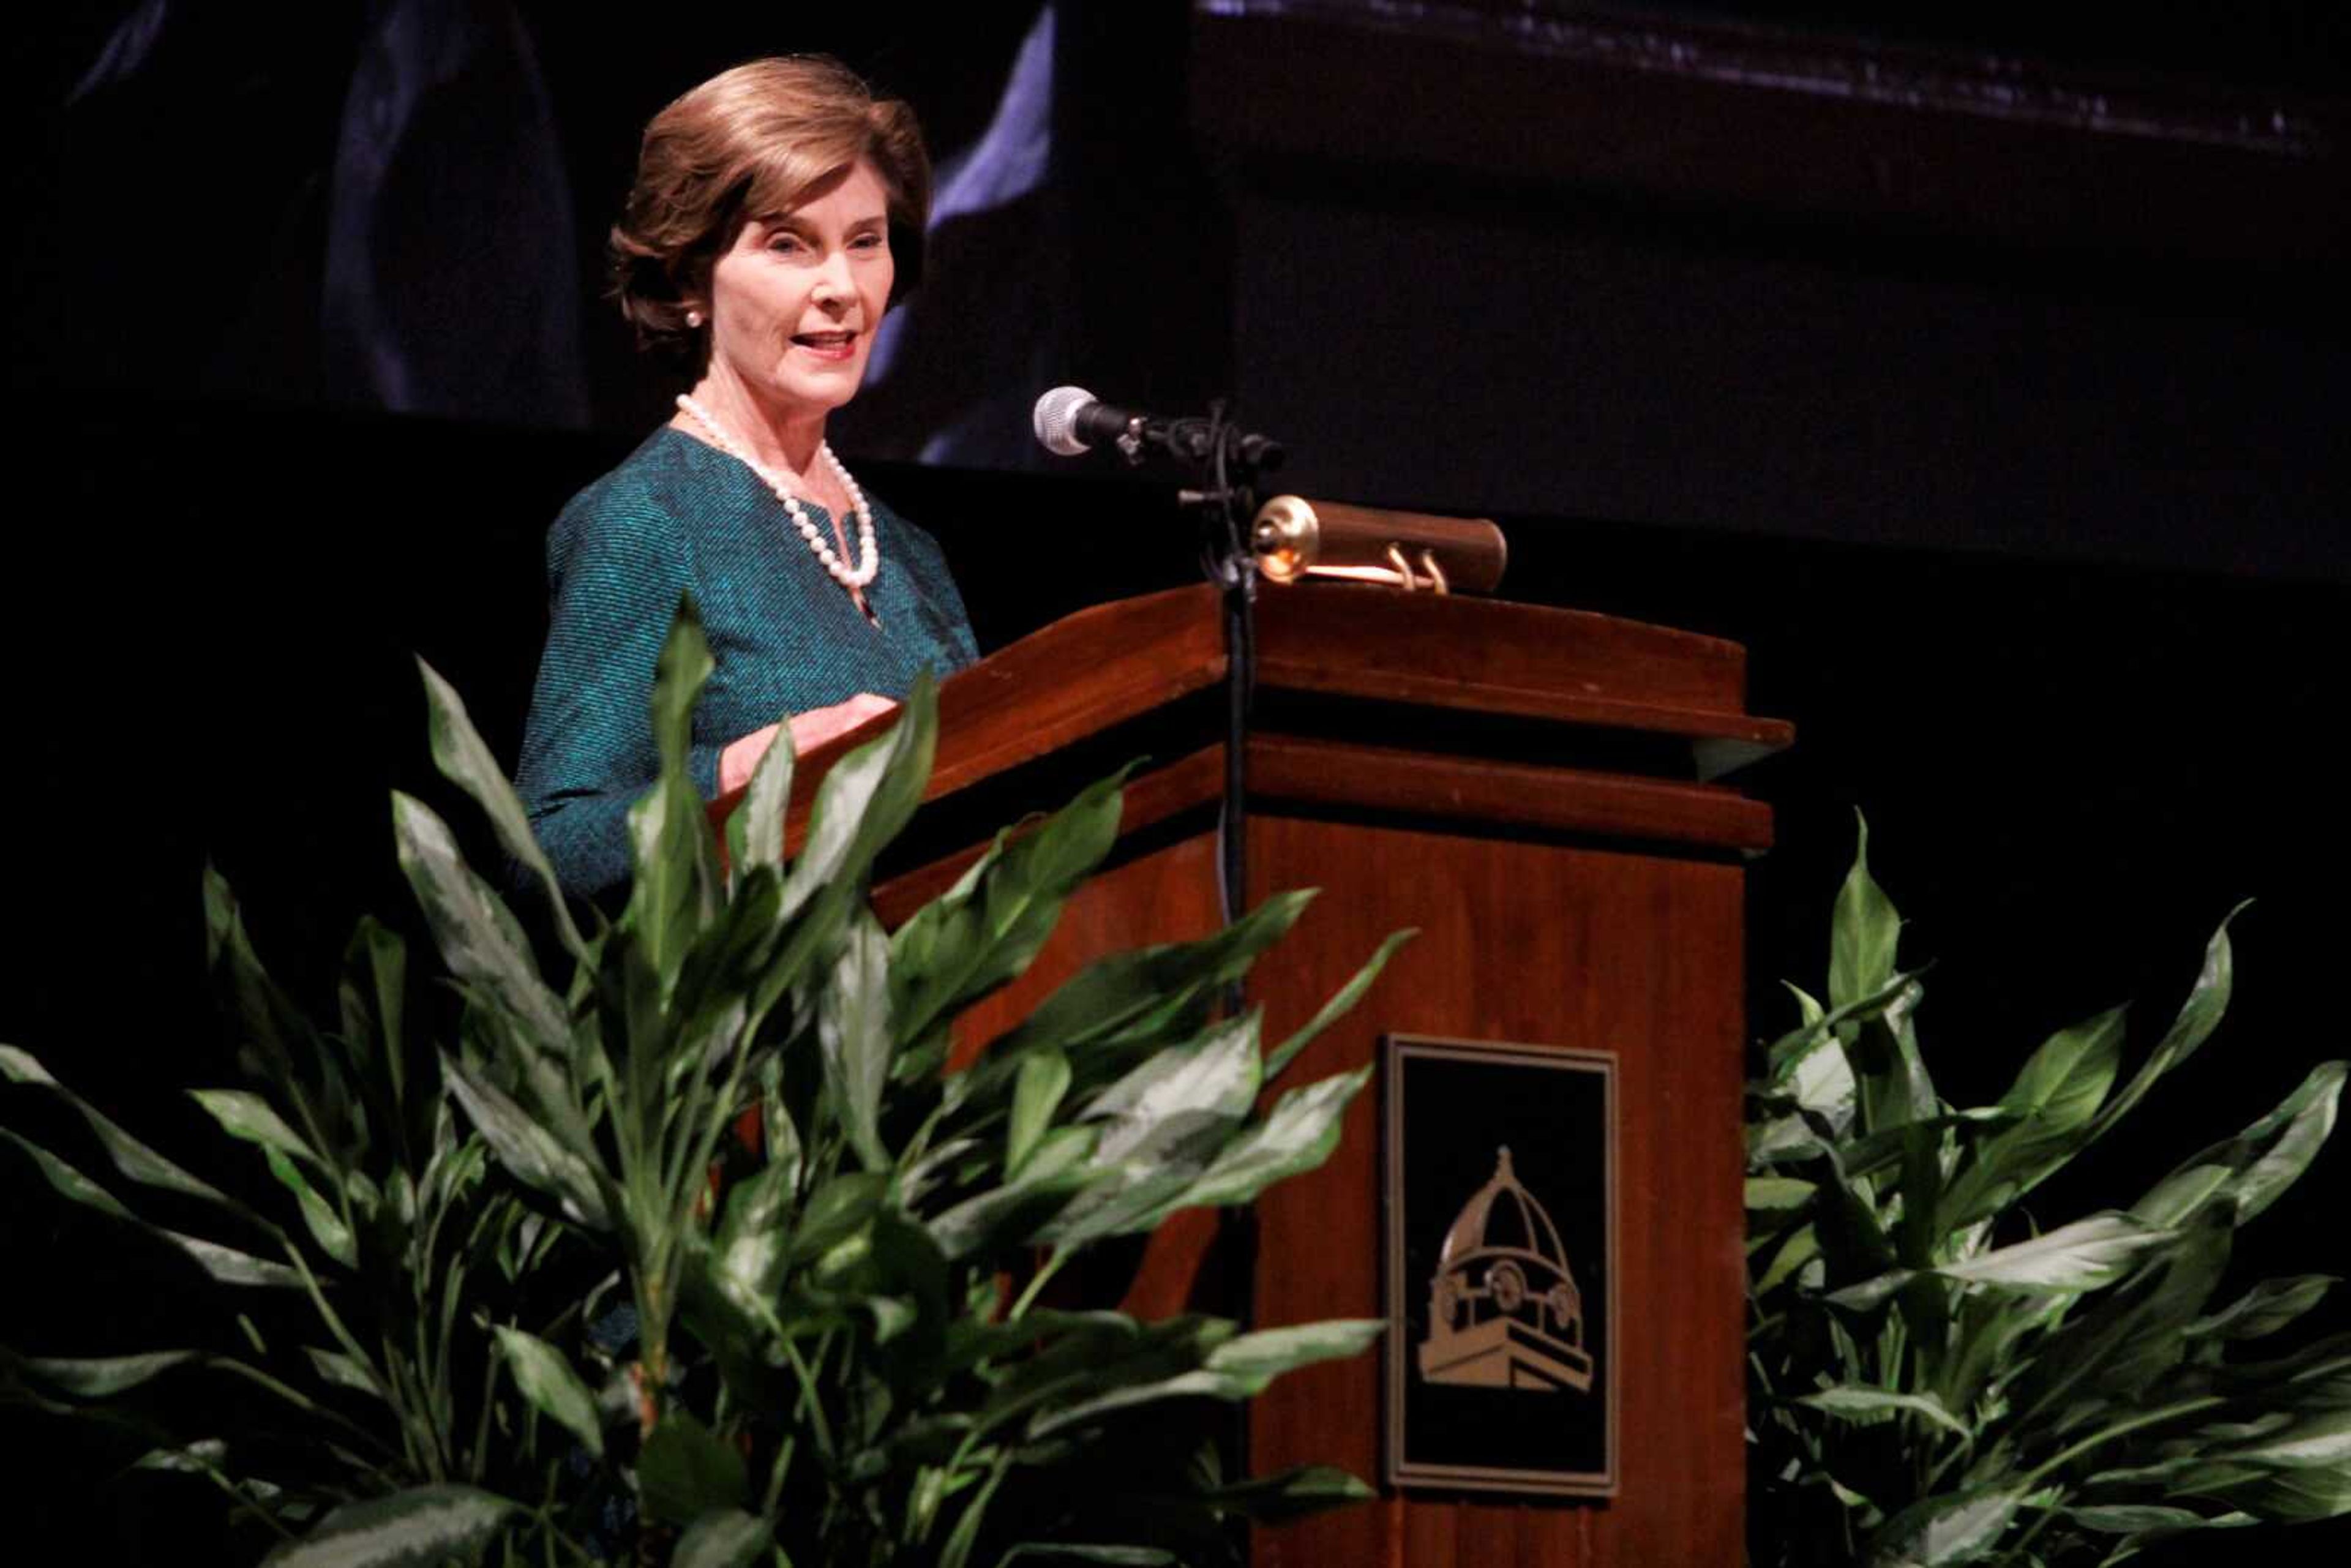 Laura Bush delivers a speech to the audience in attendance at the Show Me Center for the “Evening with Laura Bush” event on Feb. 21.